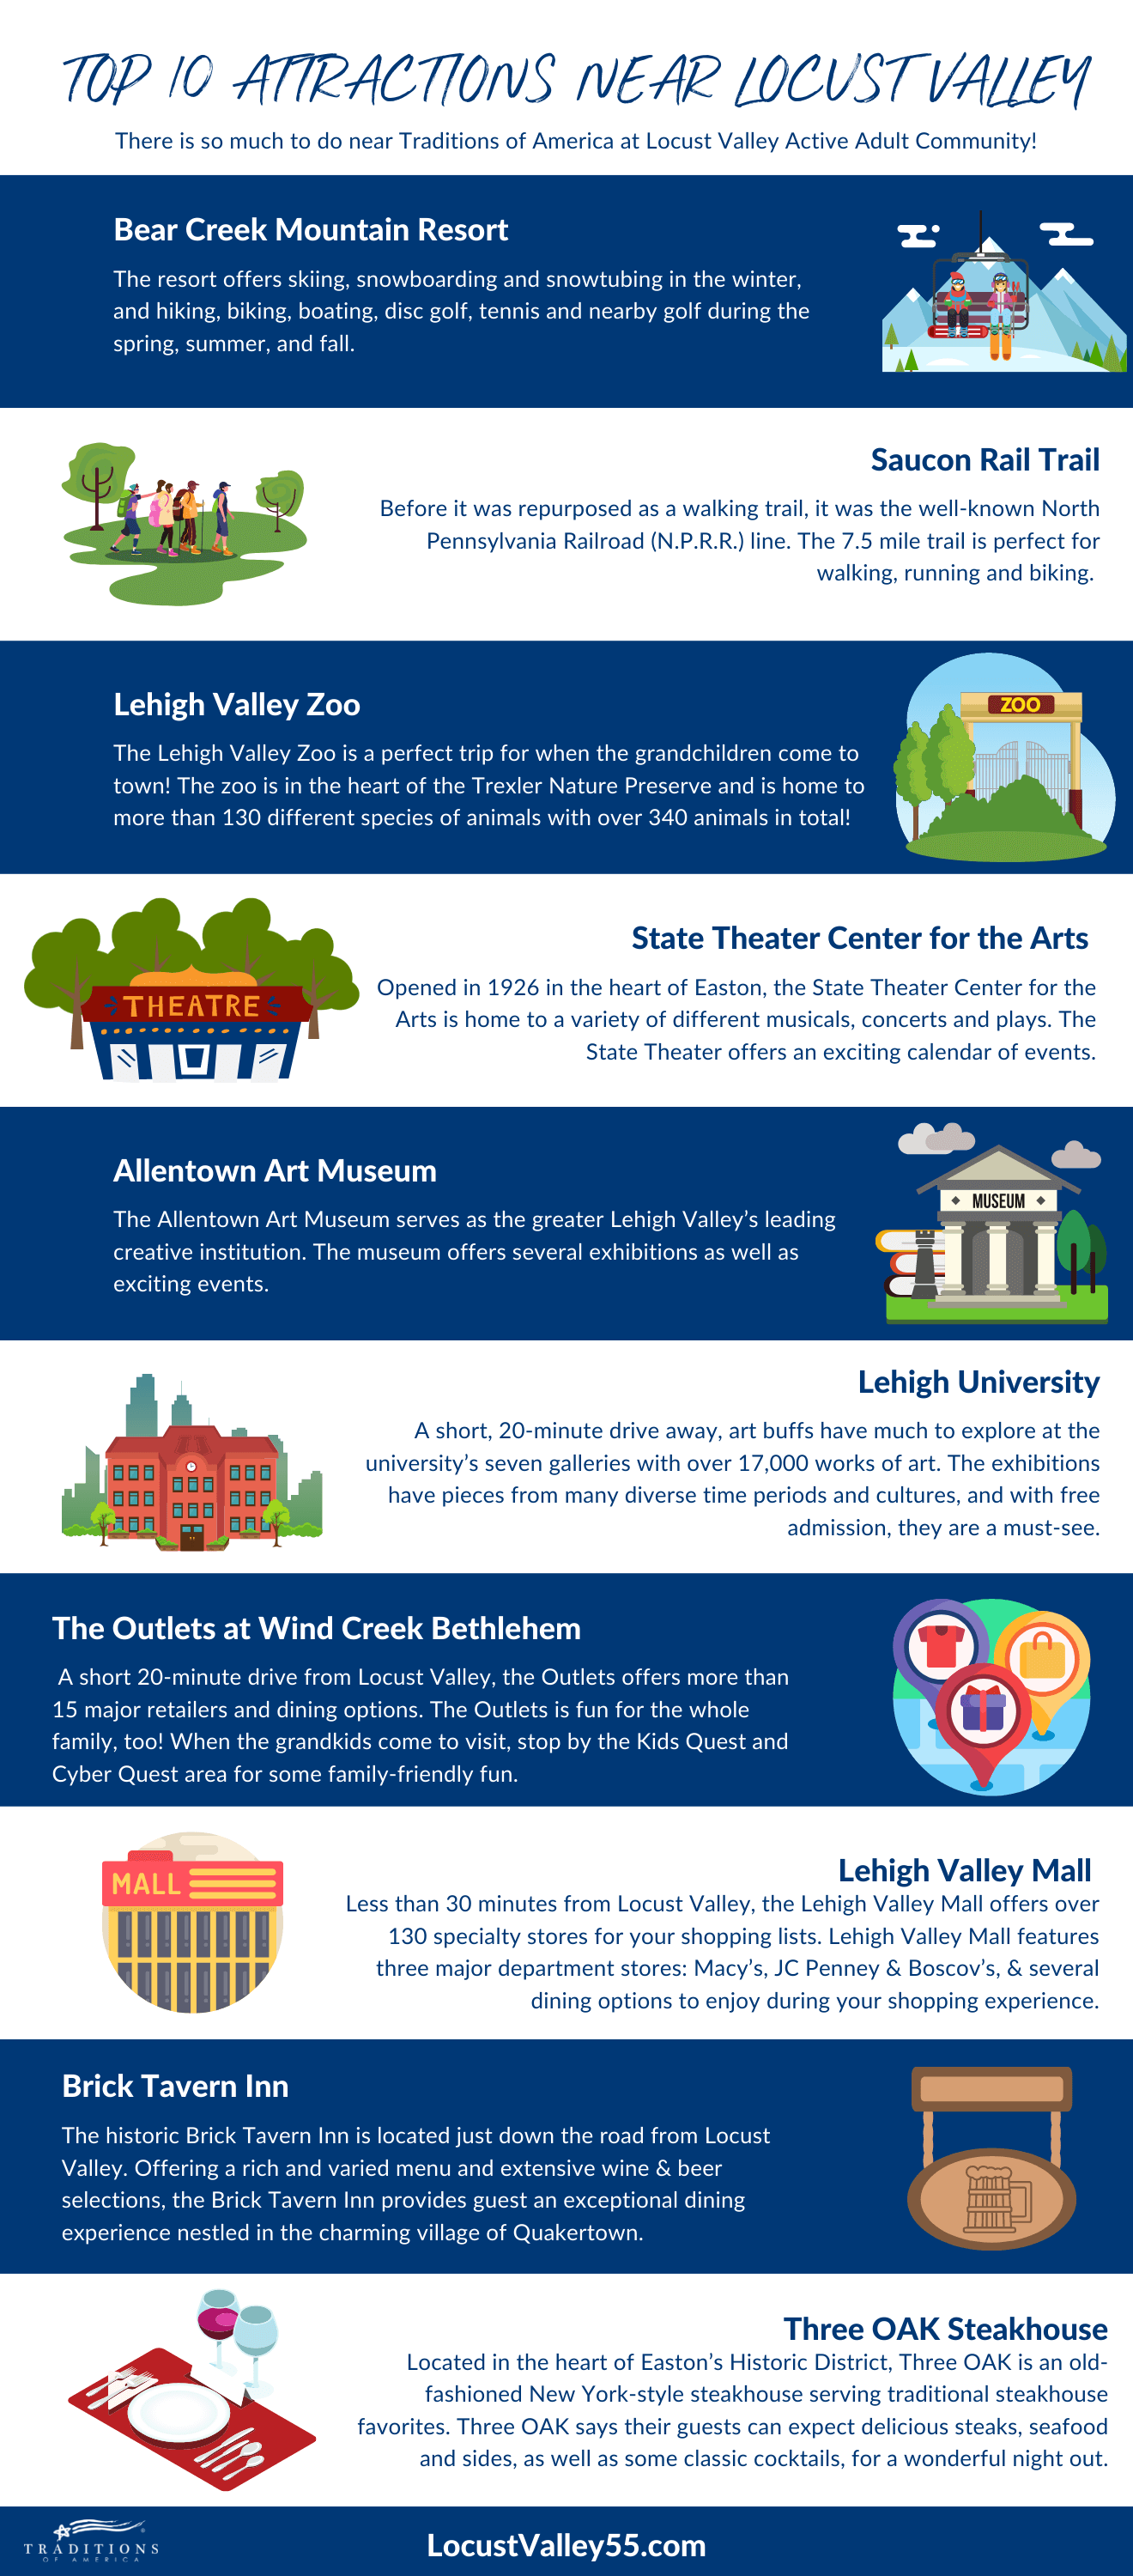 Top 10 Attractions Near Locust Valley Infographic